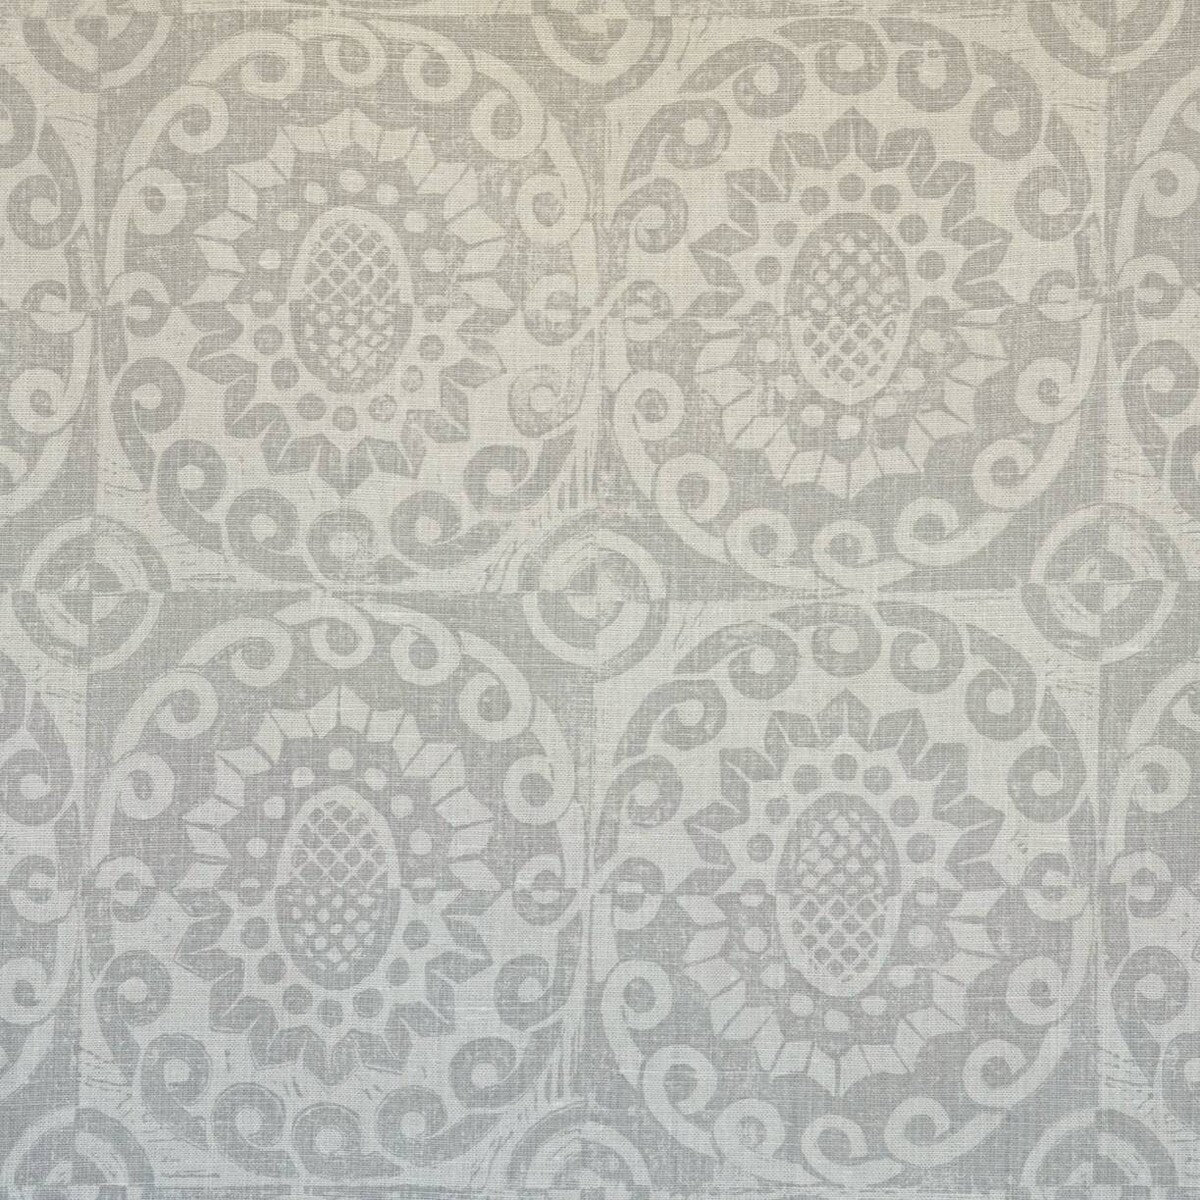 Pineapple On Oyster fabric in pale taupe color - pattern BFC-3623.1.0 - by Lee Jofa in the Blithfield collection